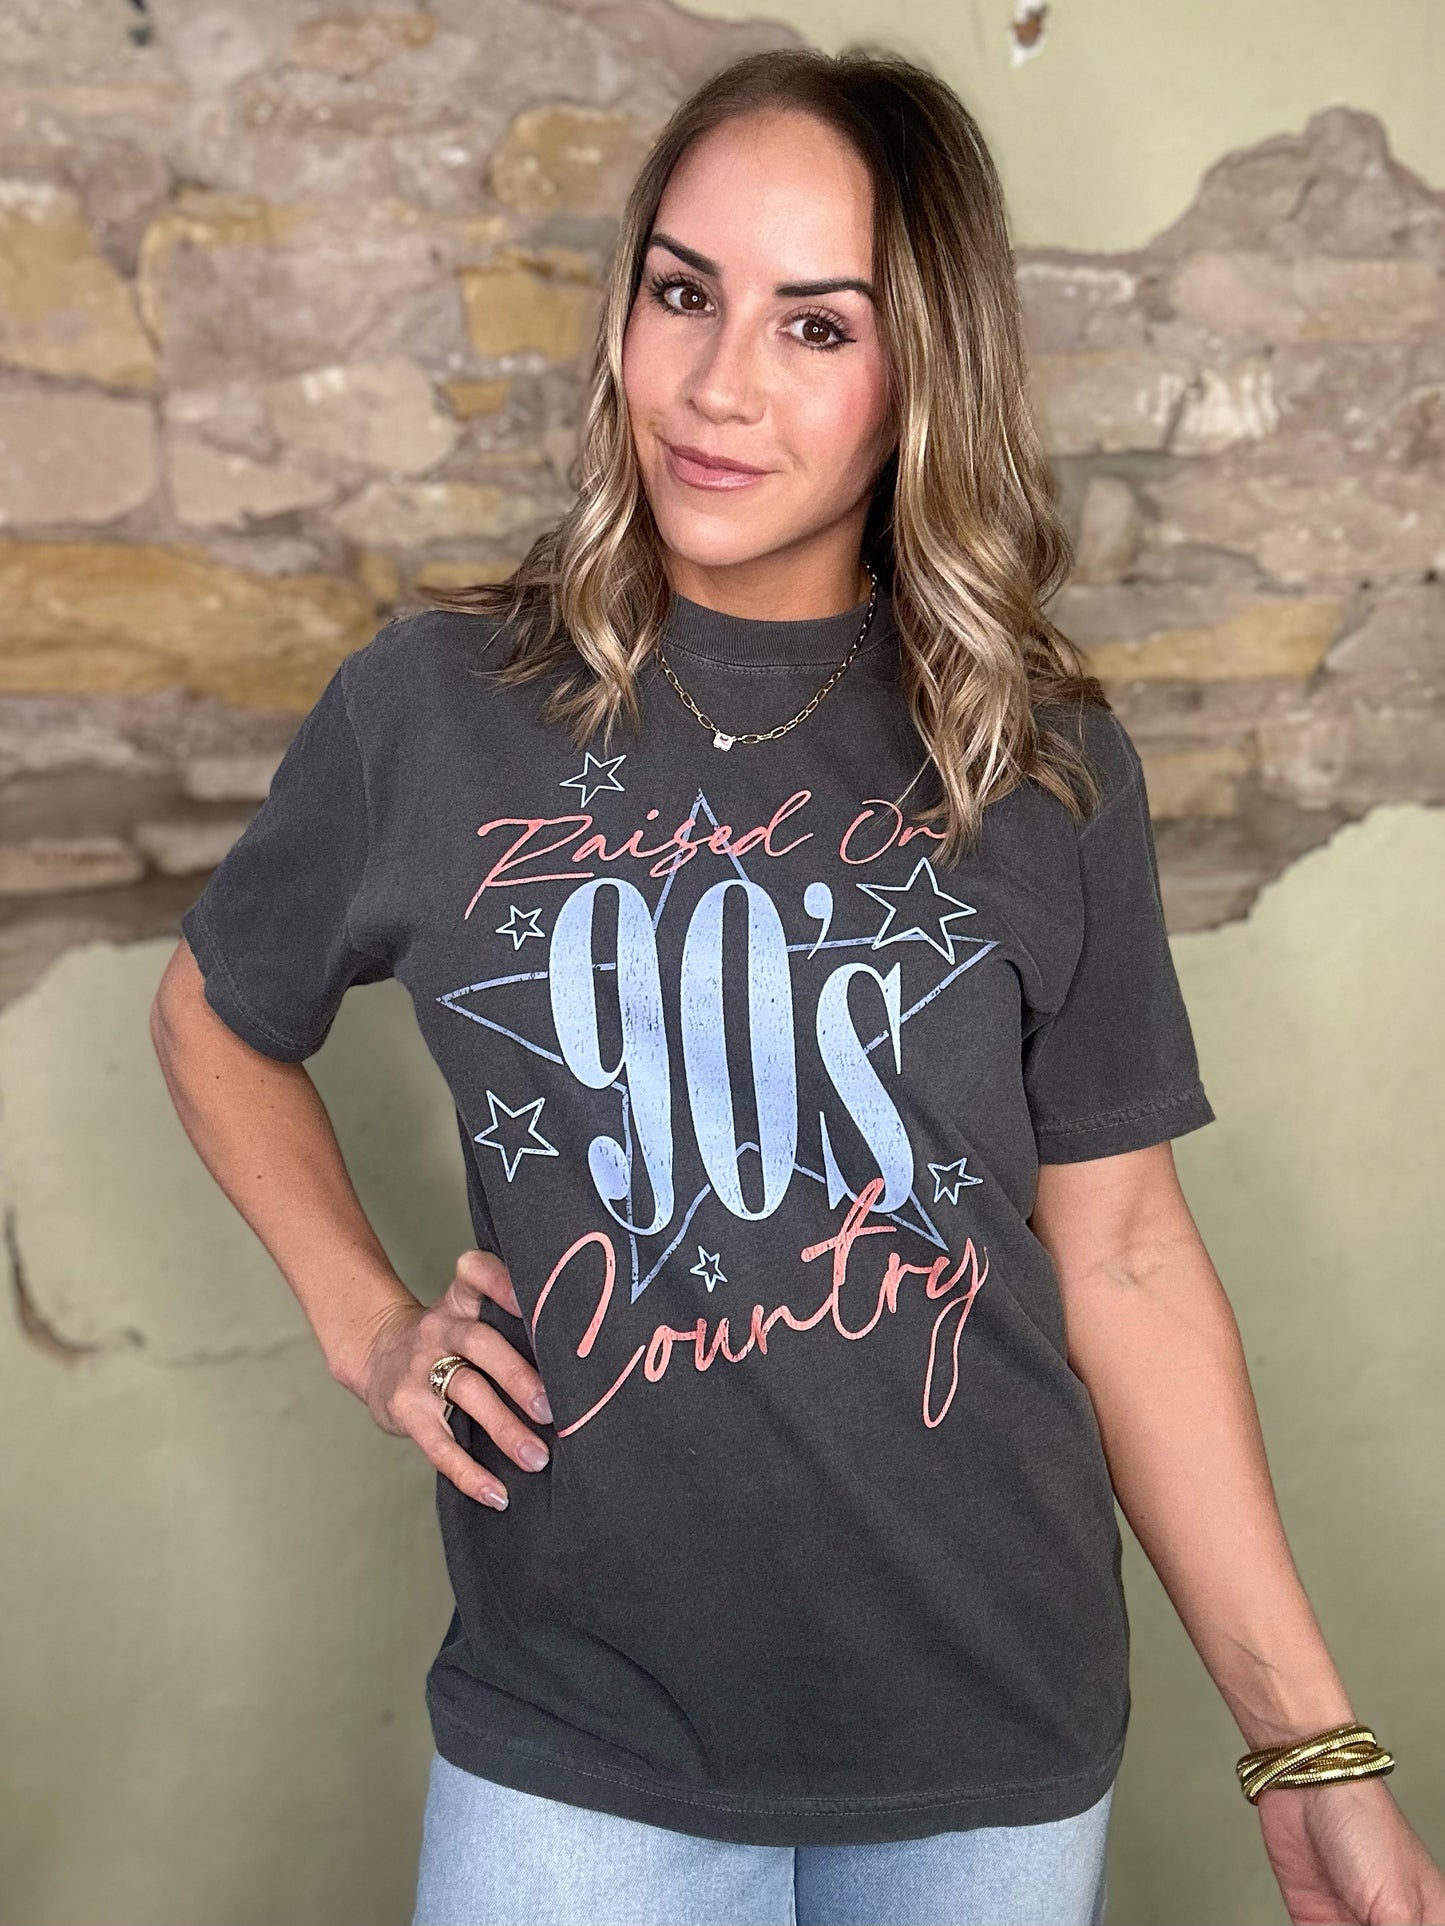 Raised On 90's Country Music Tee in charcoal